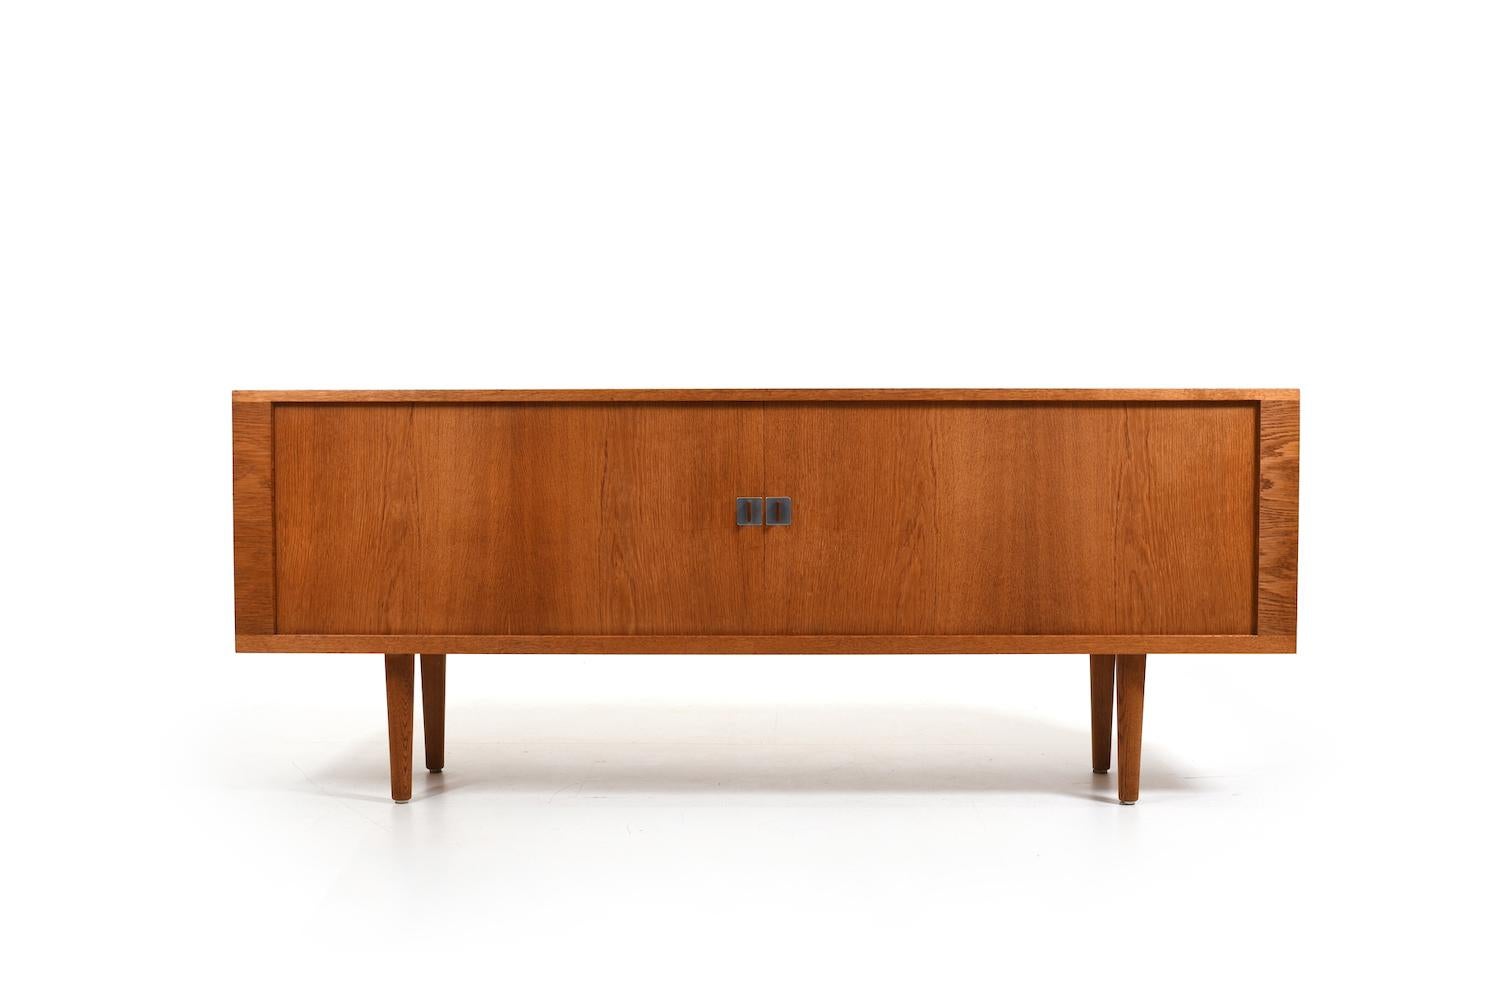 Sideboard, model RY25 in finest oak by Hans J. Wegner for RY Møbler 1950s In front with sliding doors and inside with shelfes and drawers. Doors with beautiful handles. Early production, 1950s In good vintage condition, beautiful patina and selected